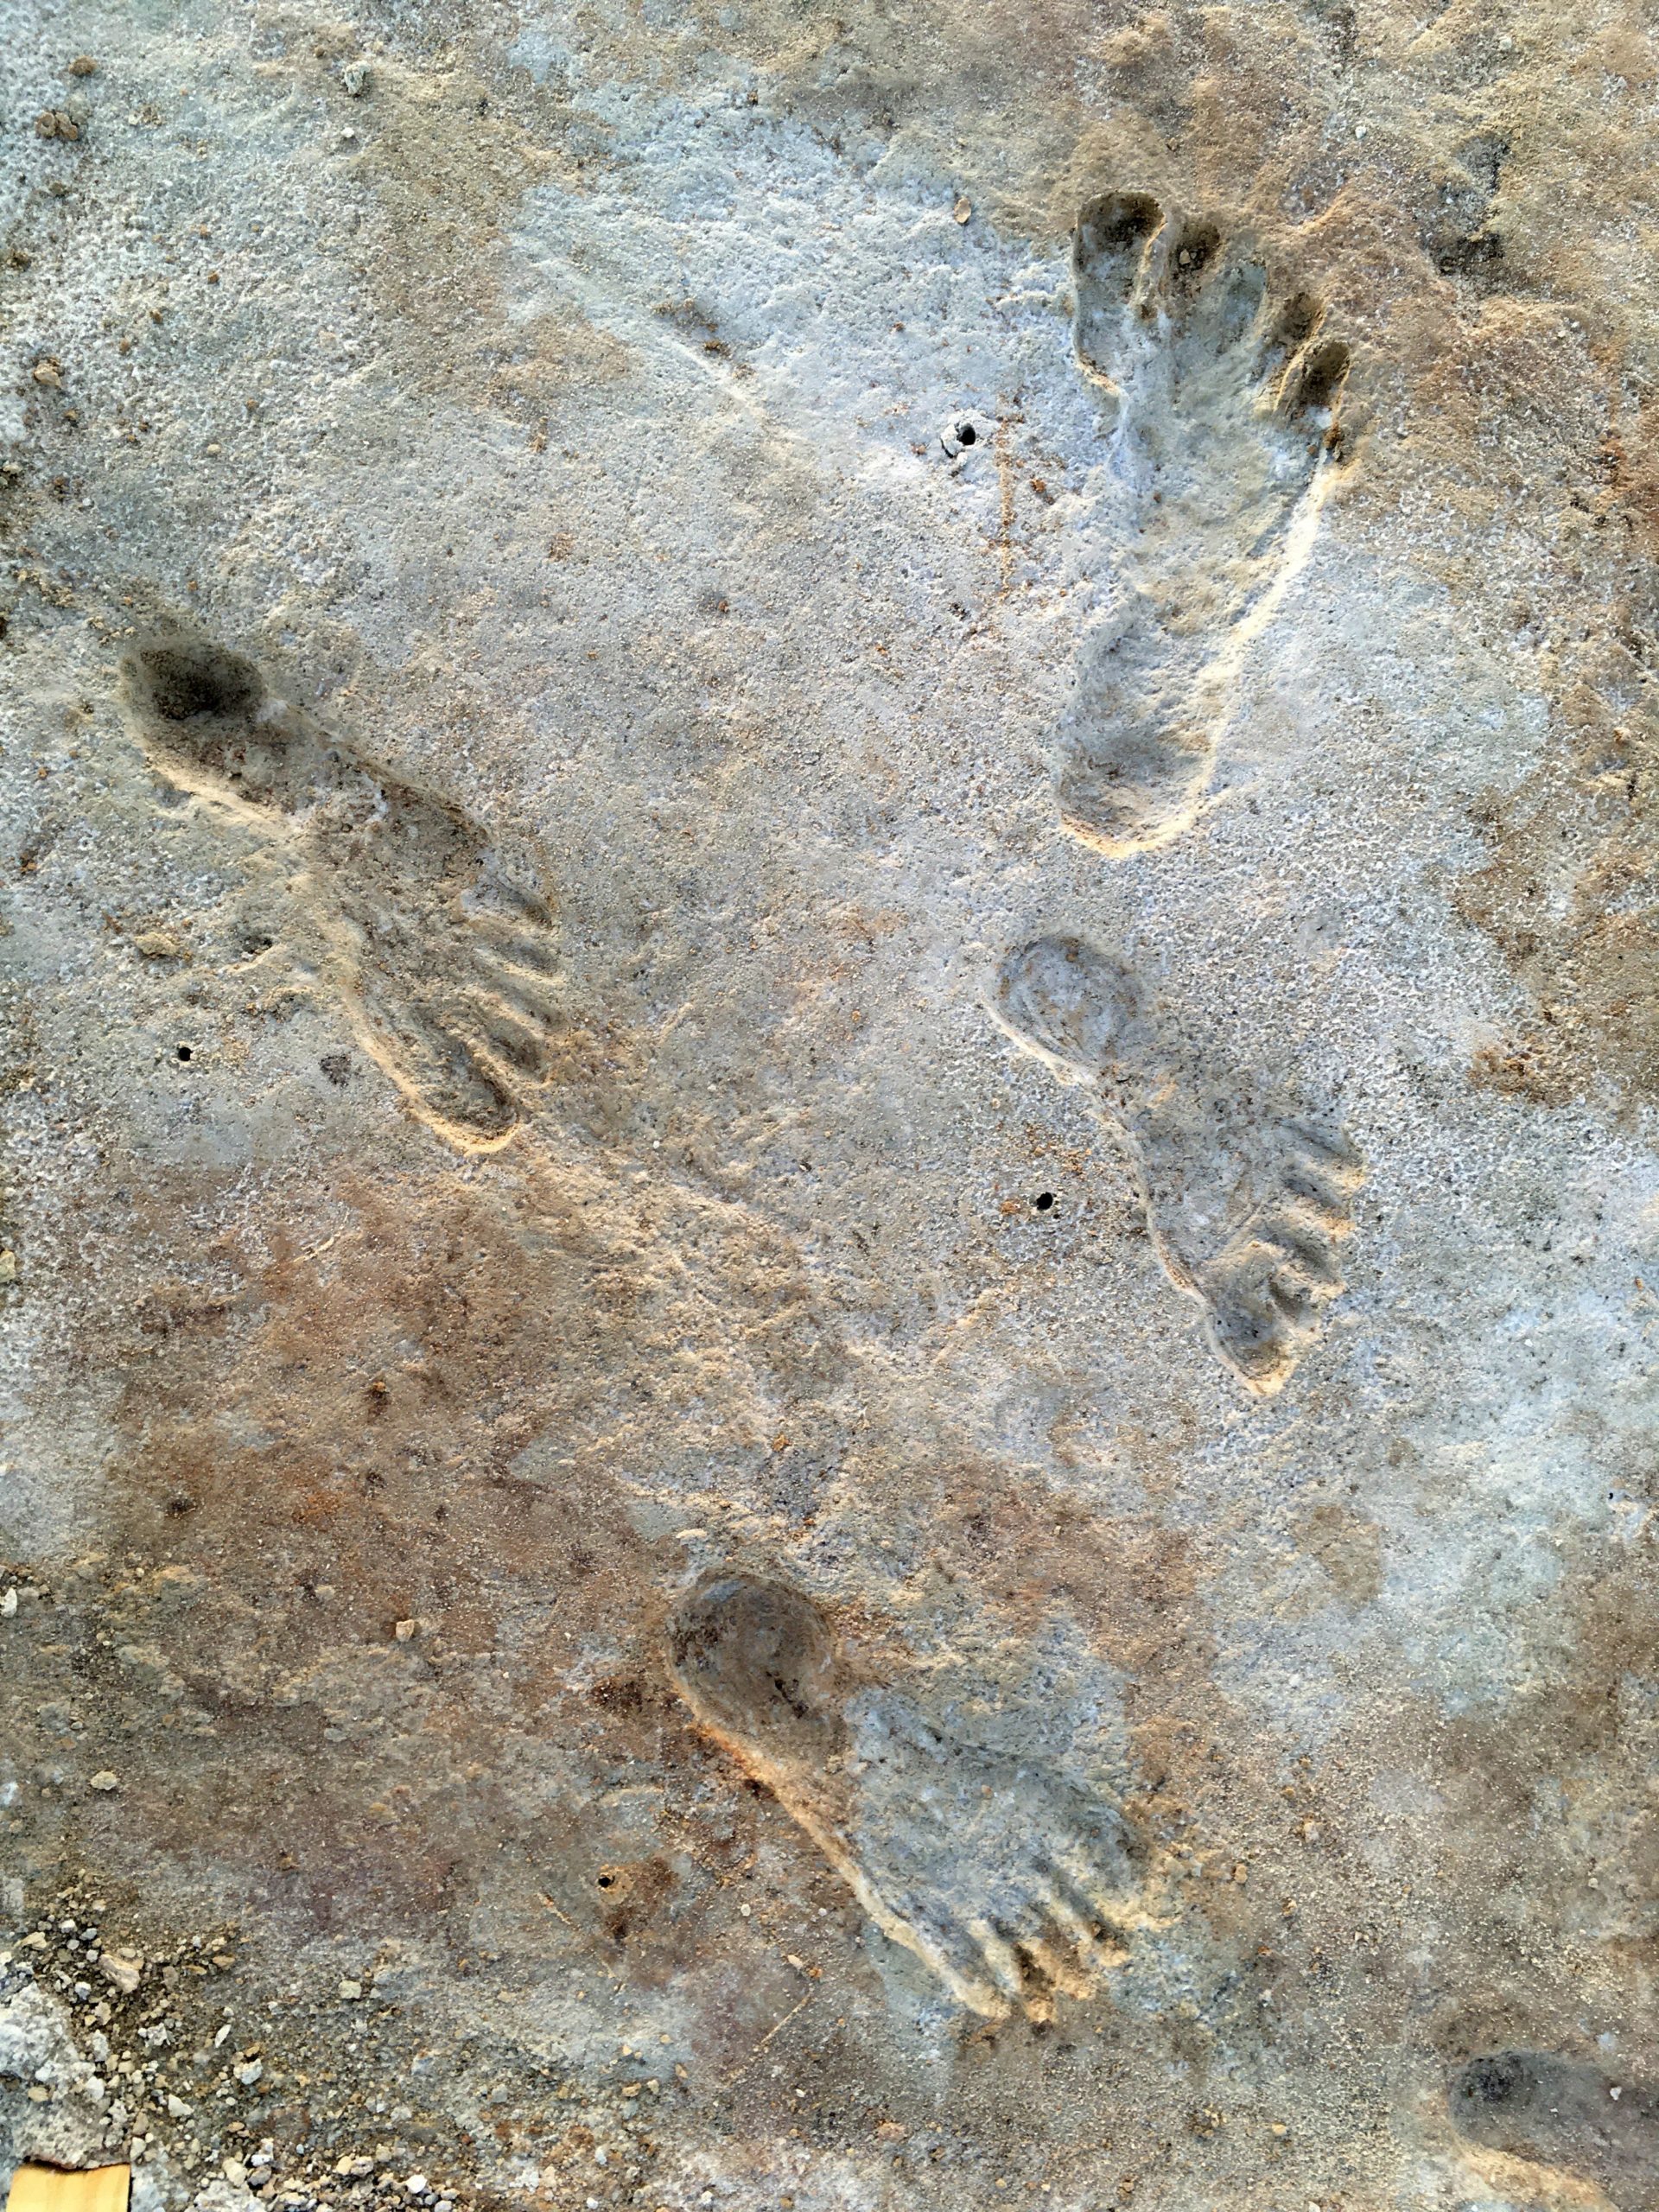 Footprints at the site (Photo: National Park Service, USGS, and Bournemouth University)